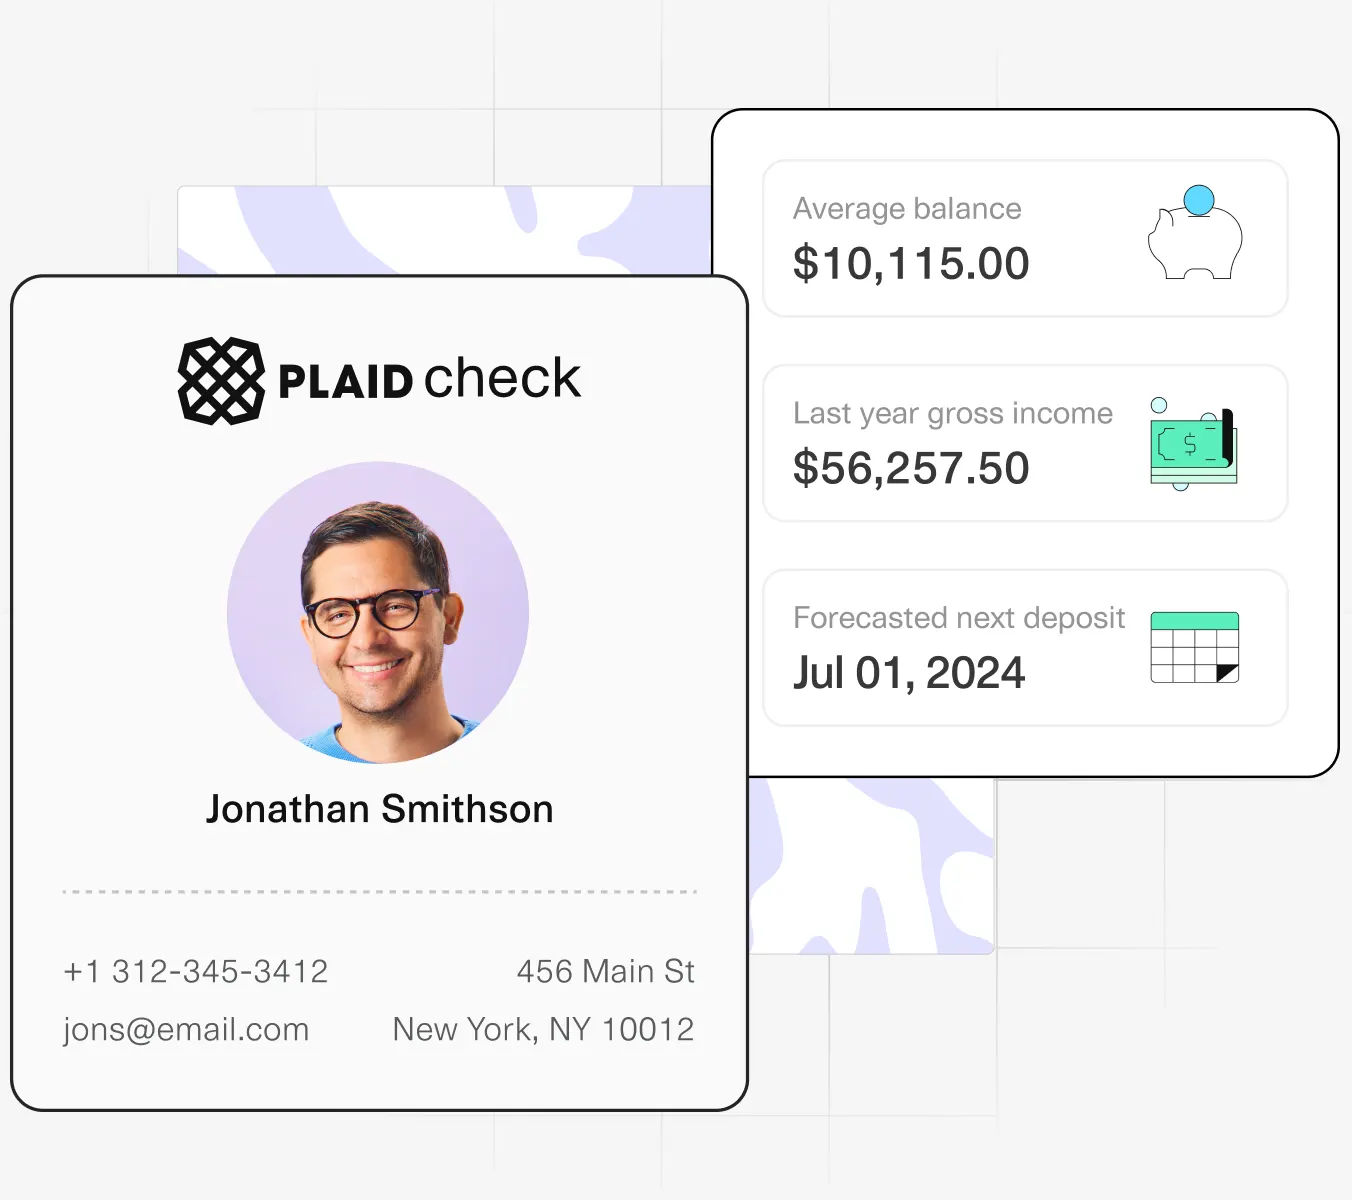 Profile card for Jonathan Smithson from PLAIDcheck, displaying his photo, contact details, and financial summary: average balance of $10,115.00, last year's gross income of $56,257.50, and next deposit on July 01, 2024.